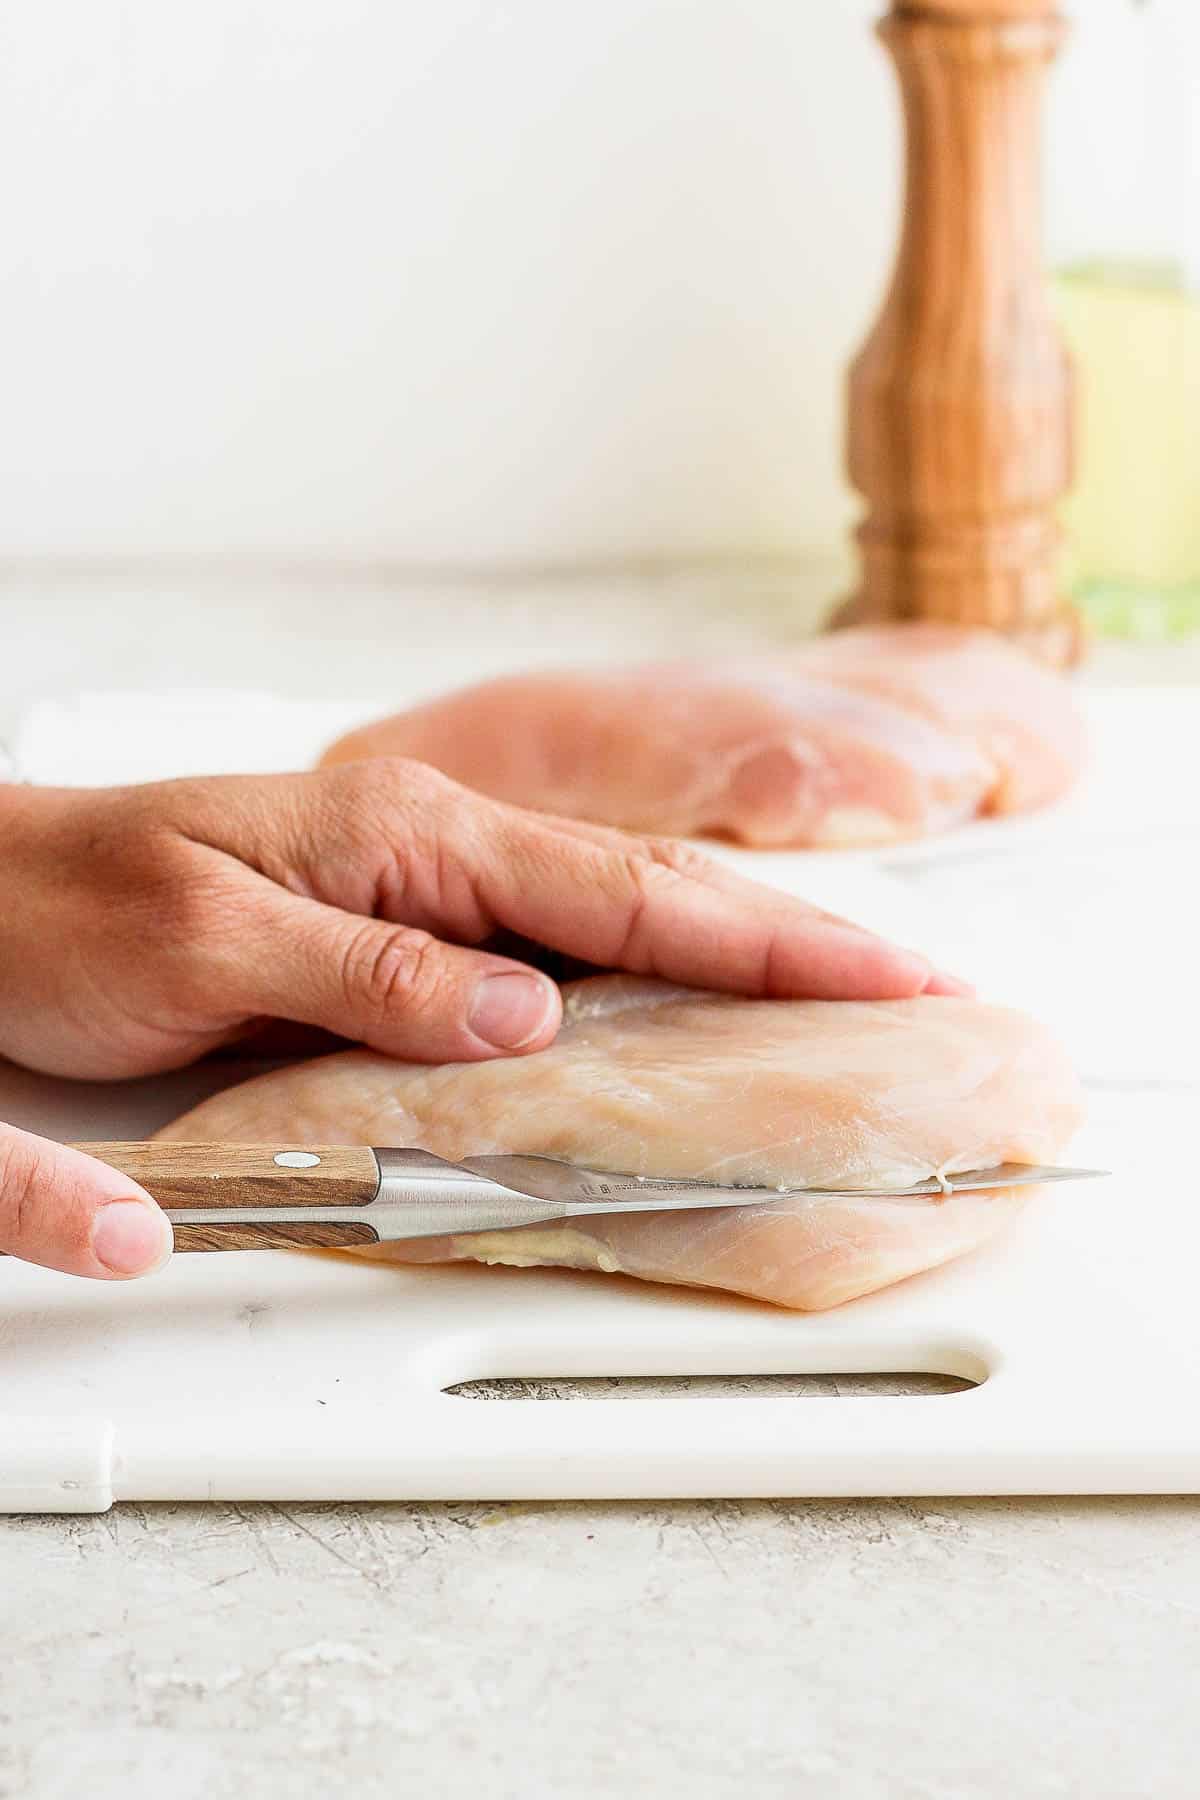 A hand placed on top of a raw chicken breast while the other cuts through the middle of the chicken breast lengthwise to the otherside. 